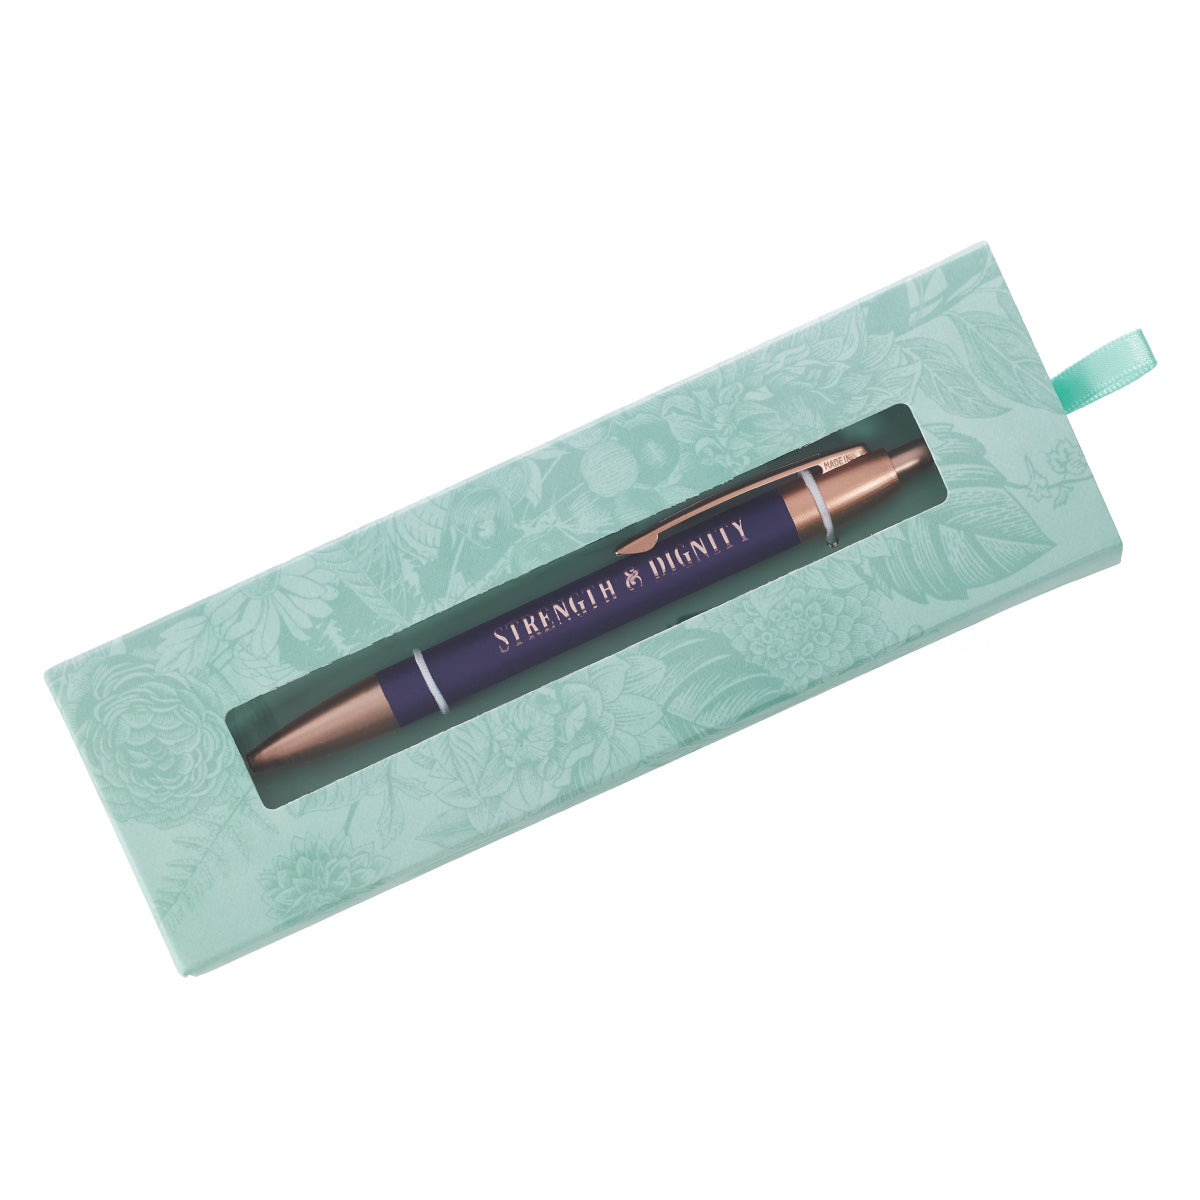 Image of Strength and Dignity - Proverbs 31:25 Pen Gift Set other